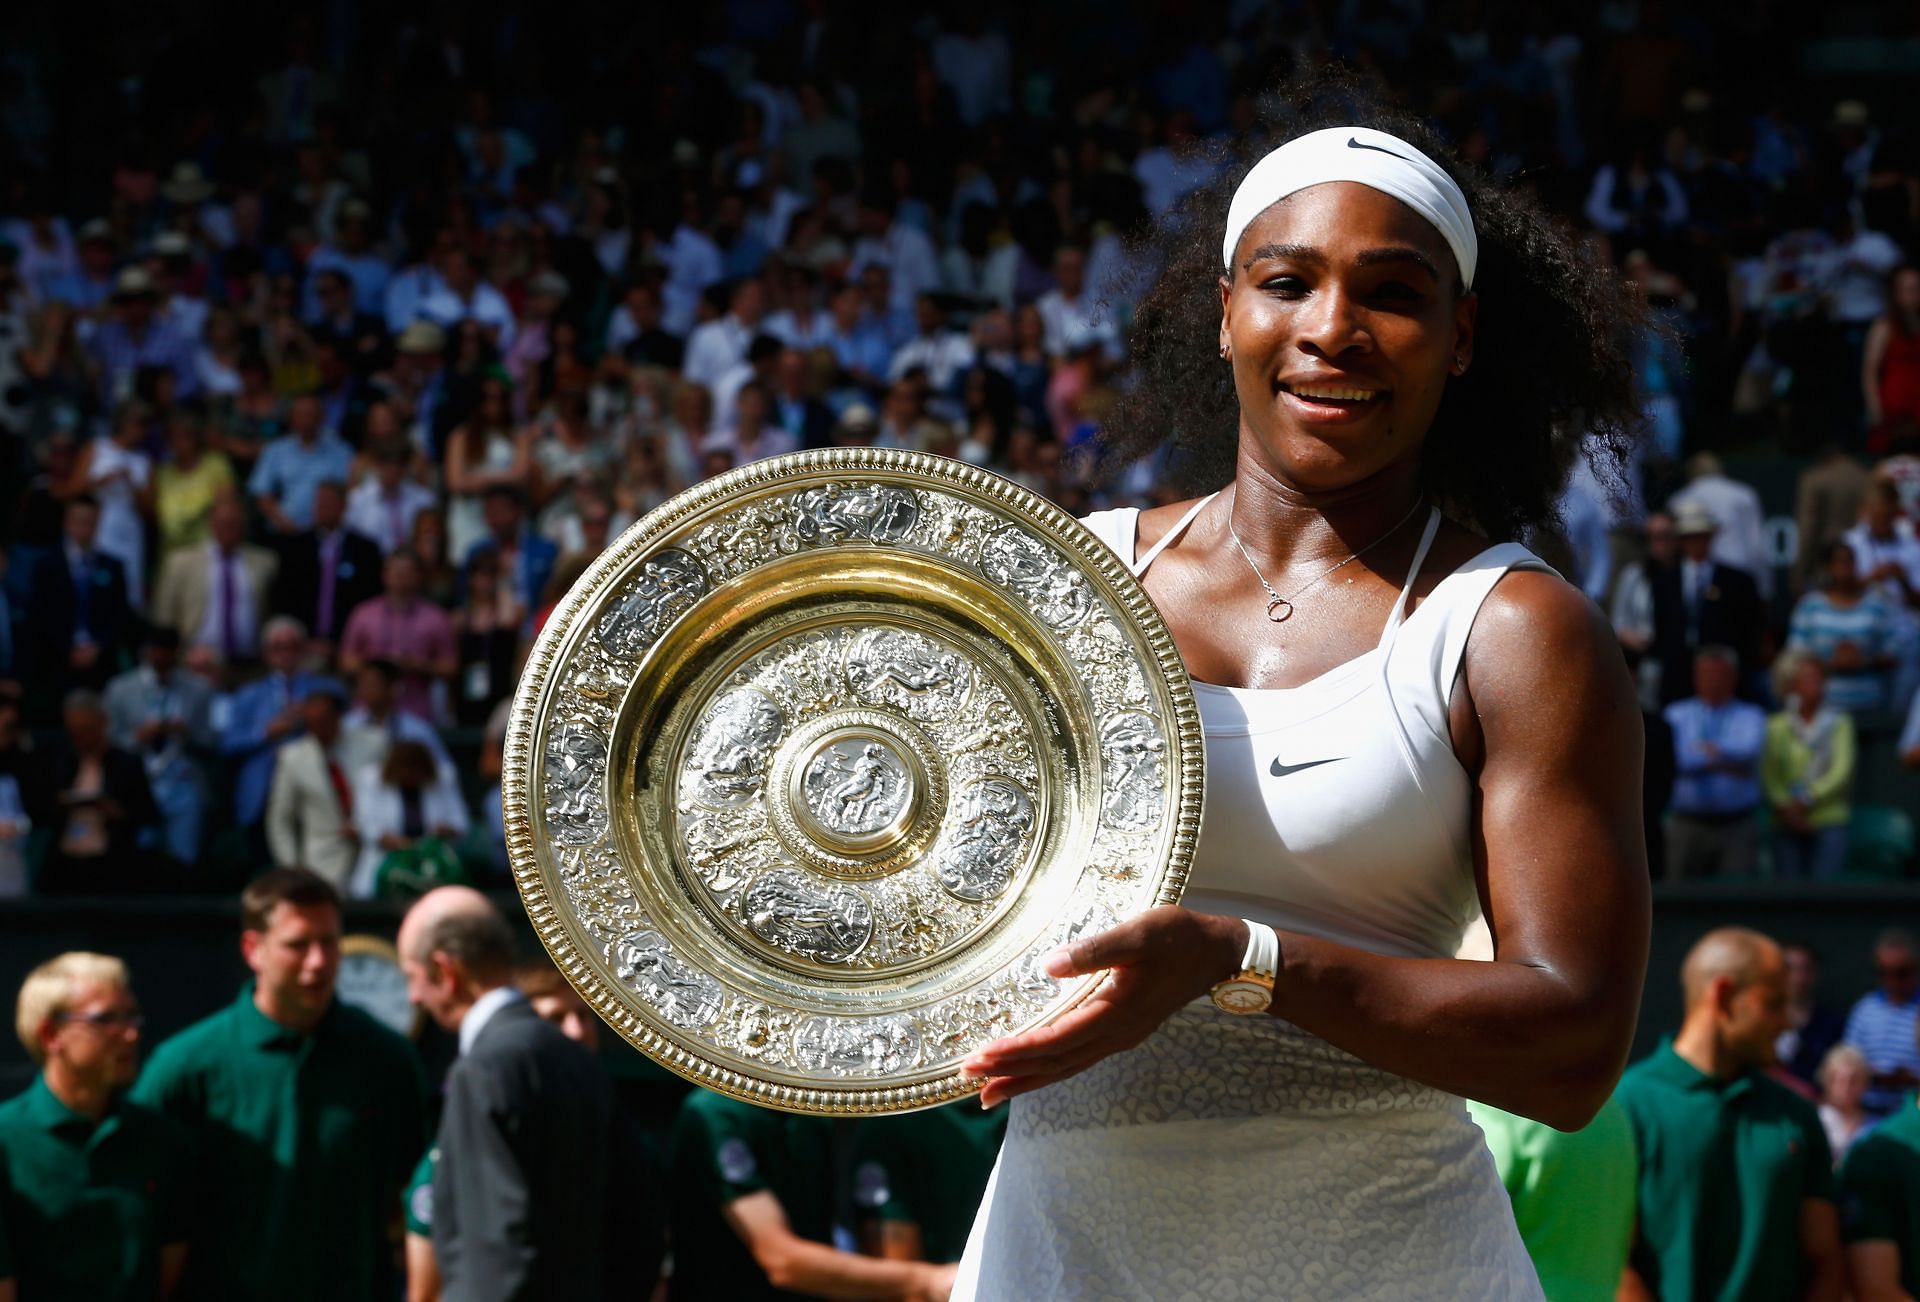 Serena Williams currently has 23 Grand Slam titles to her name